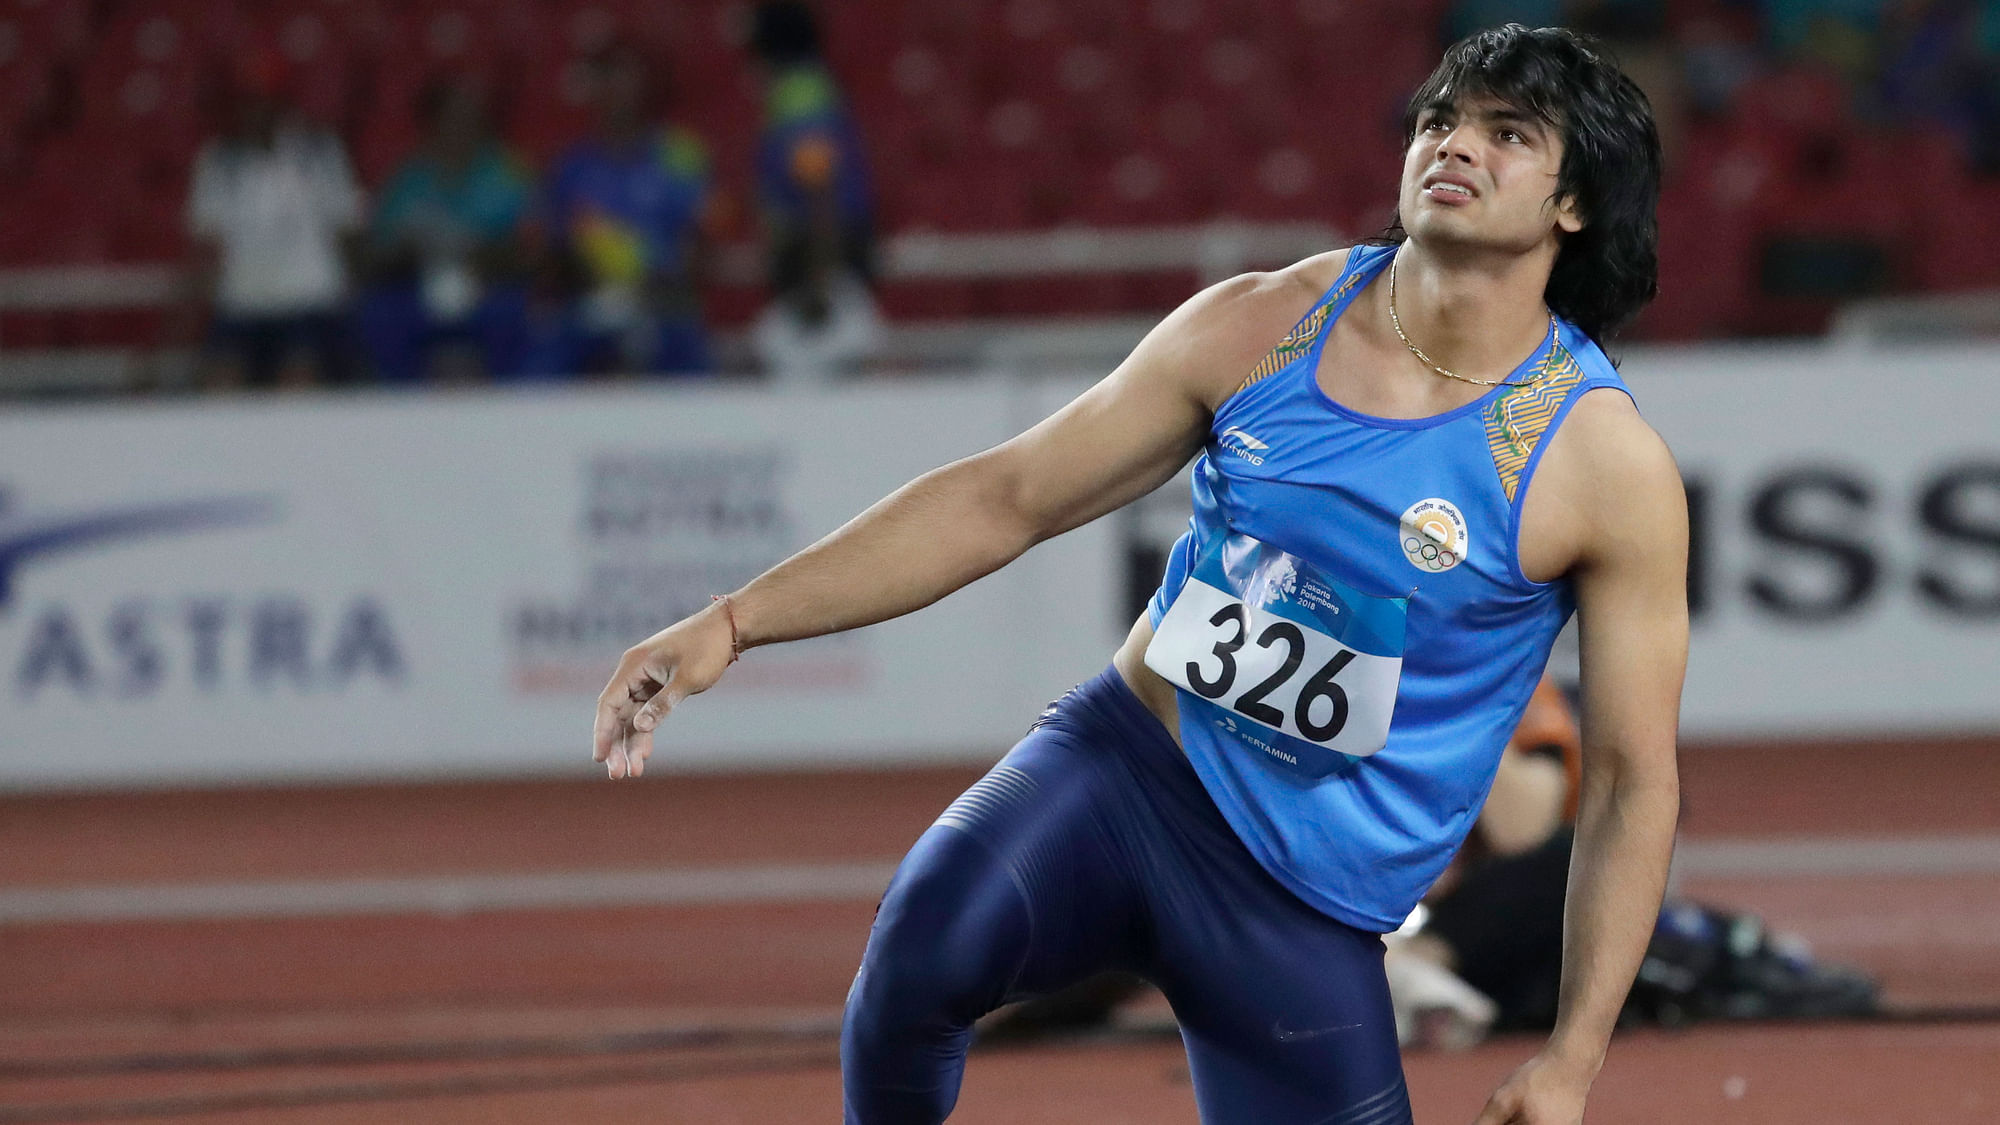 Star javelin thrower Neeraj Chopra left for Zurich hours after clinching a historic gold in the Asian Games